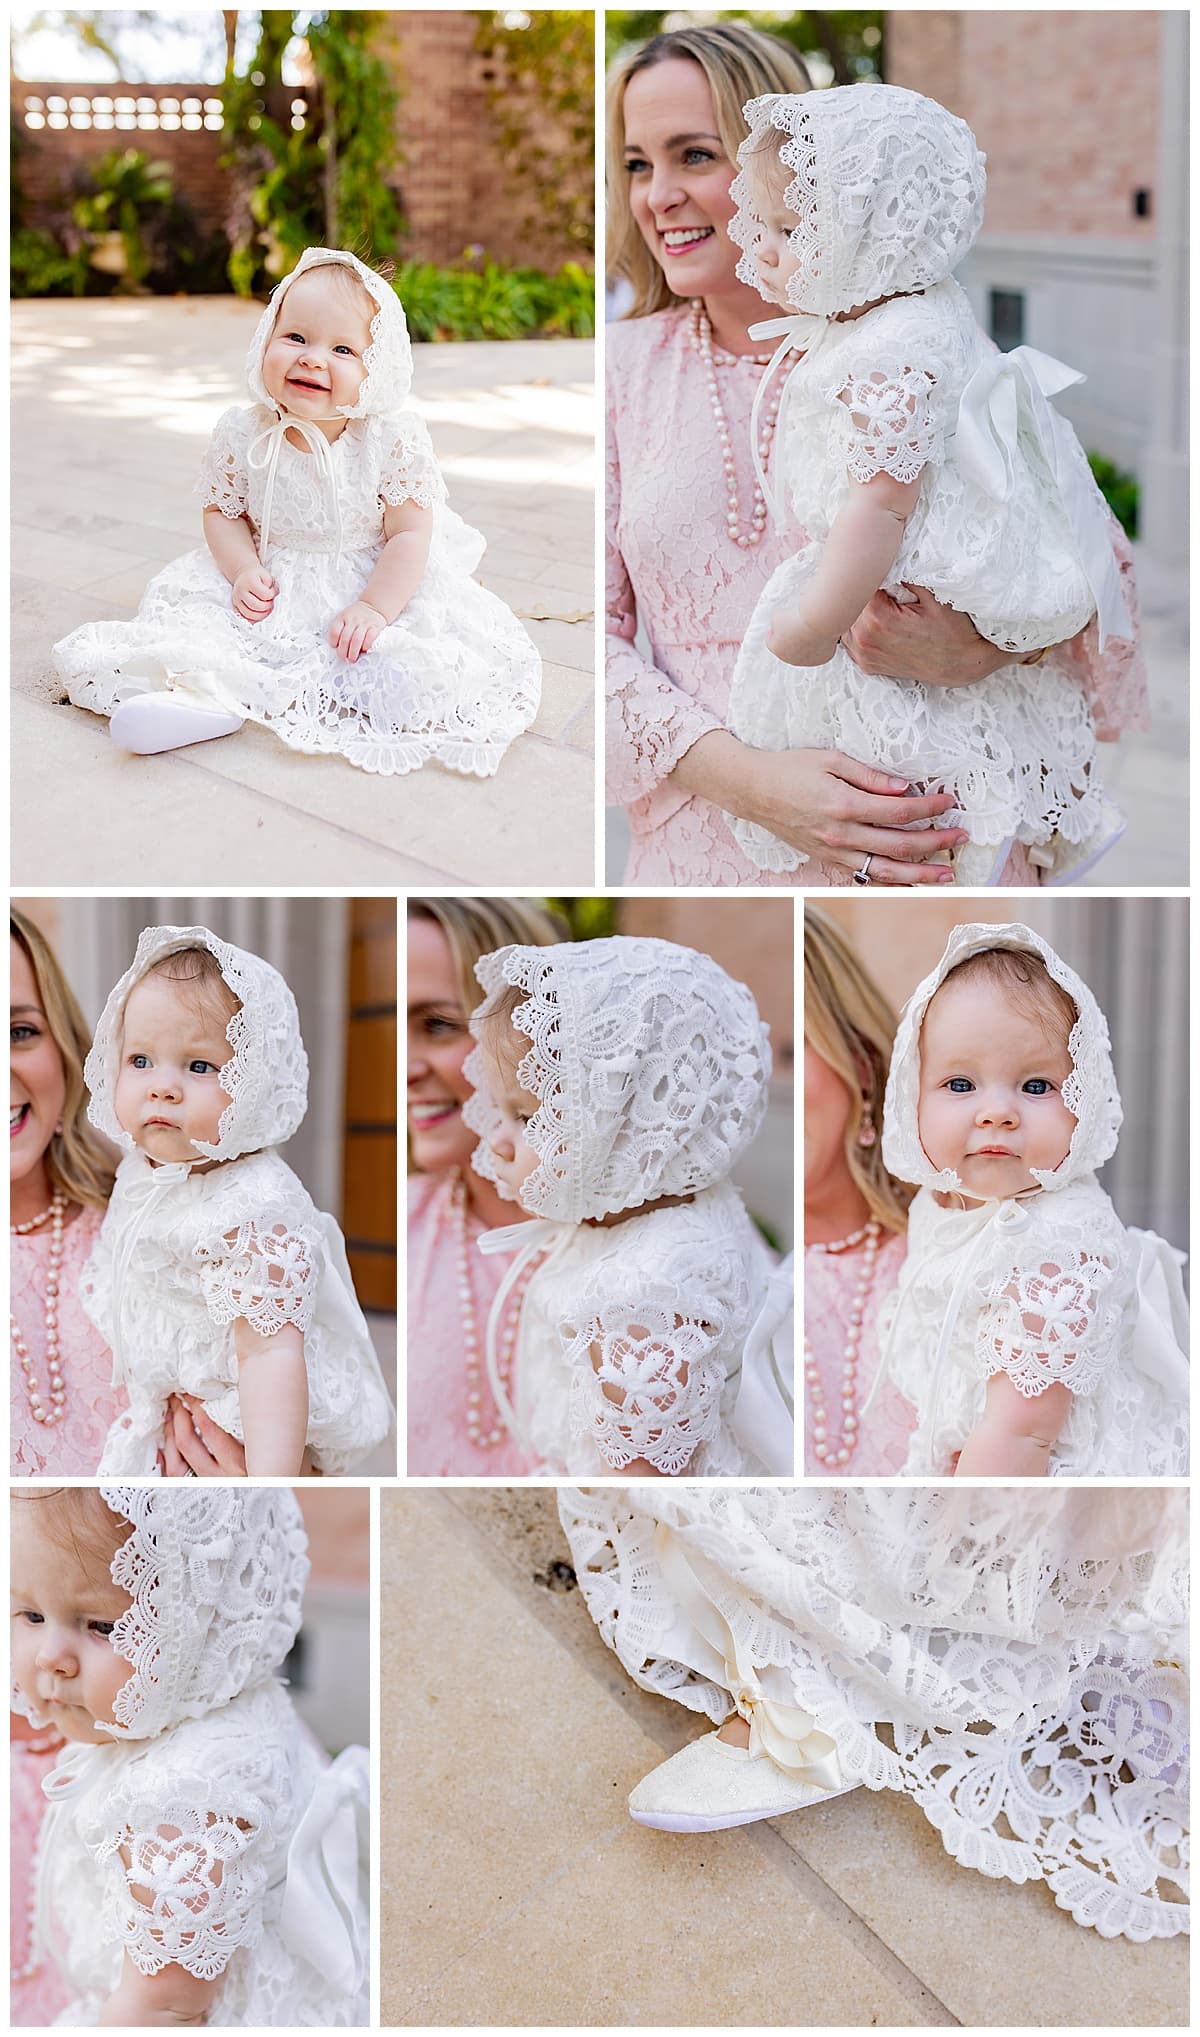 Baby girl wearing her christening gown